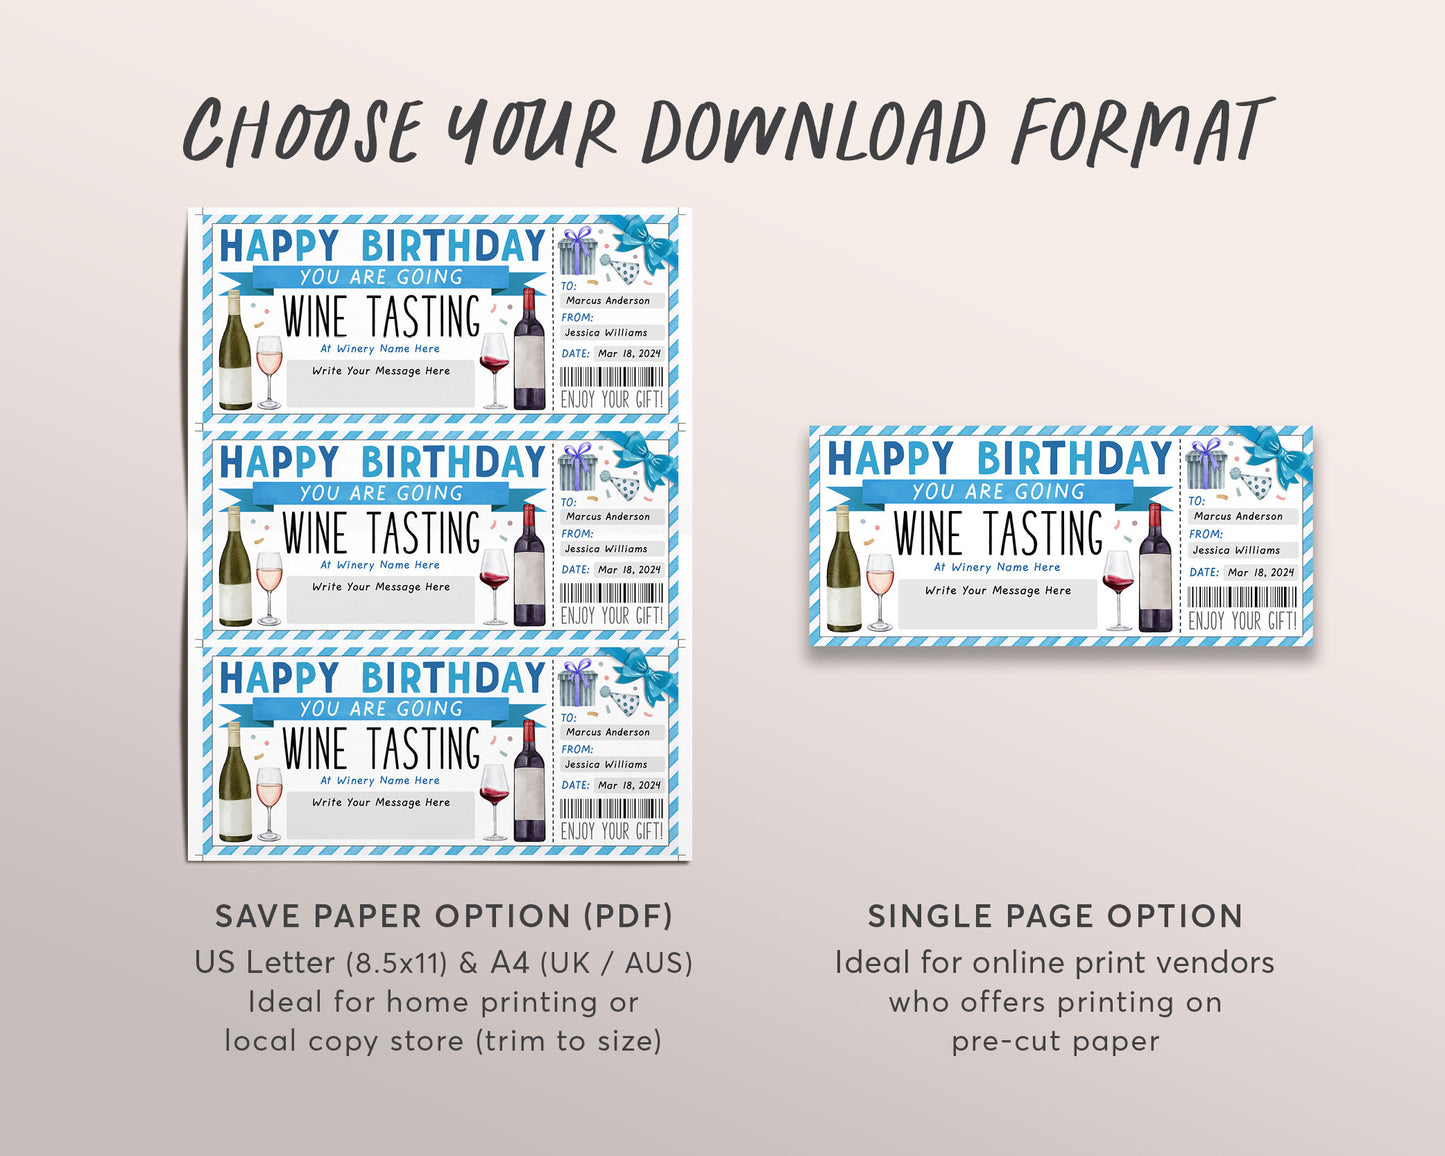 Wine Tasting Gift Voucher Editable Template, Birthday Surprise Wine Tasting Ticket Gift Certificate For Him, Winery Vineyard Coupon Reveal